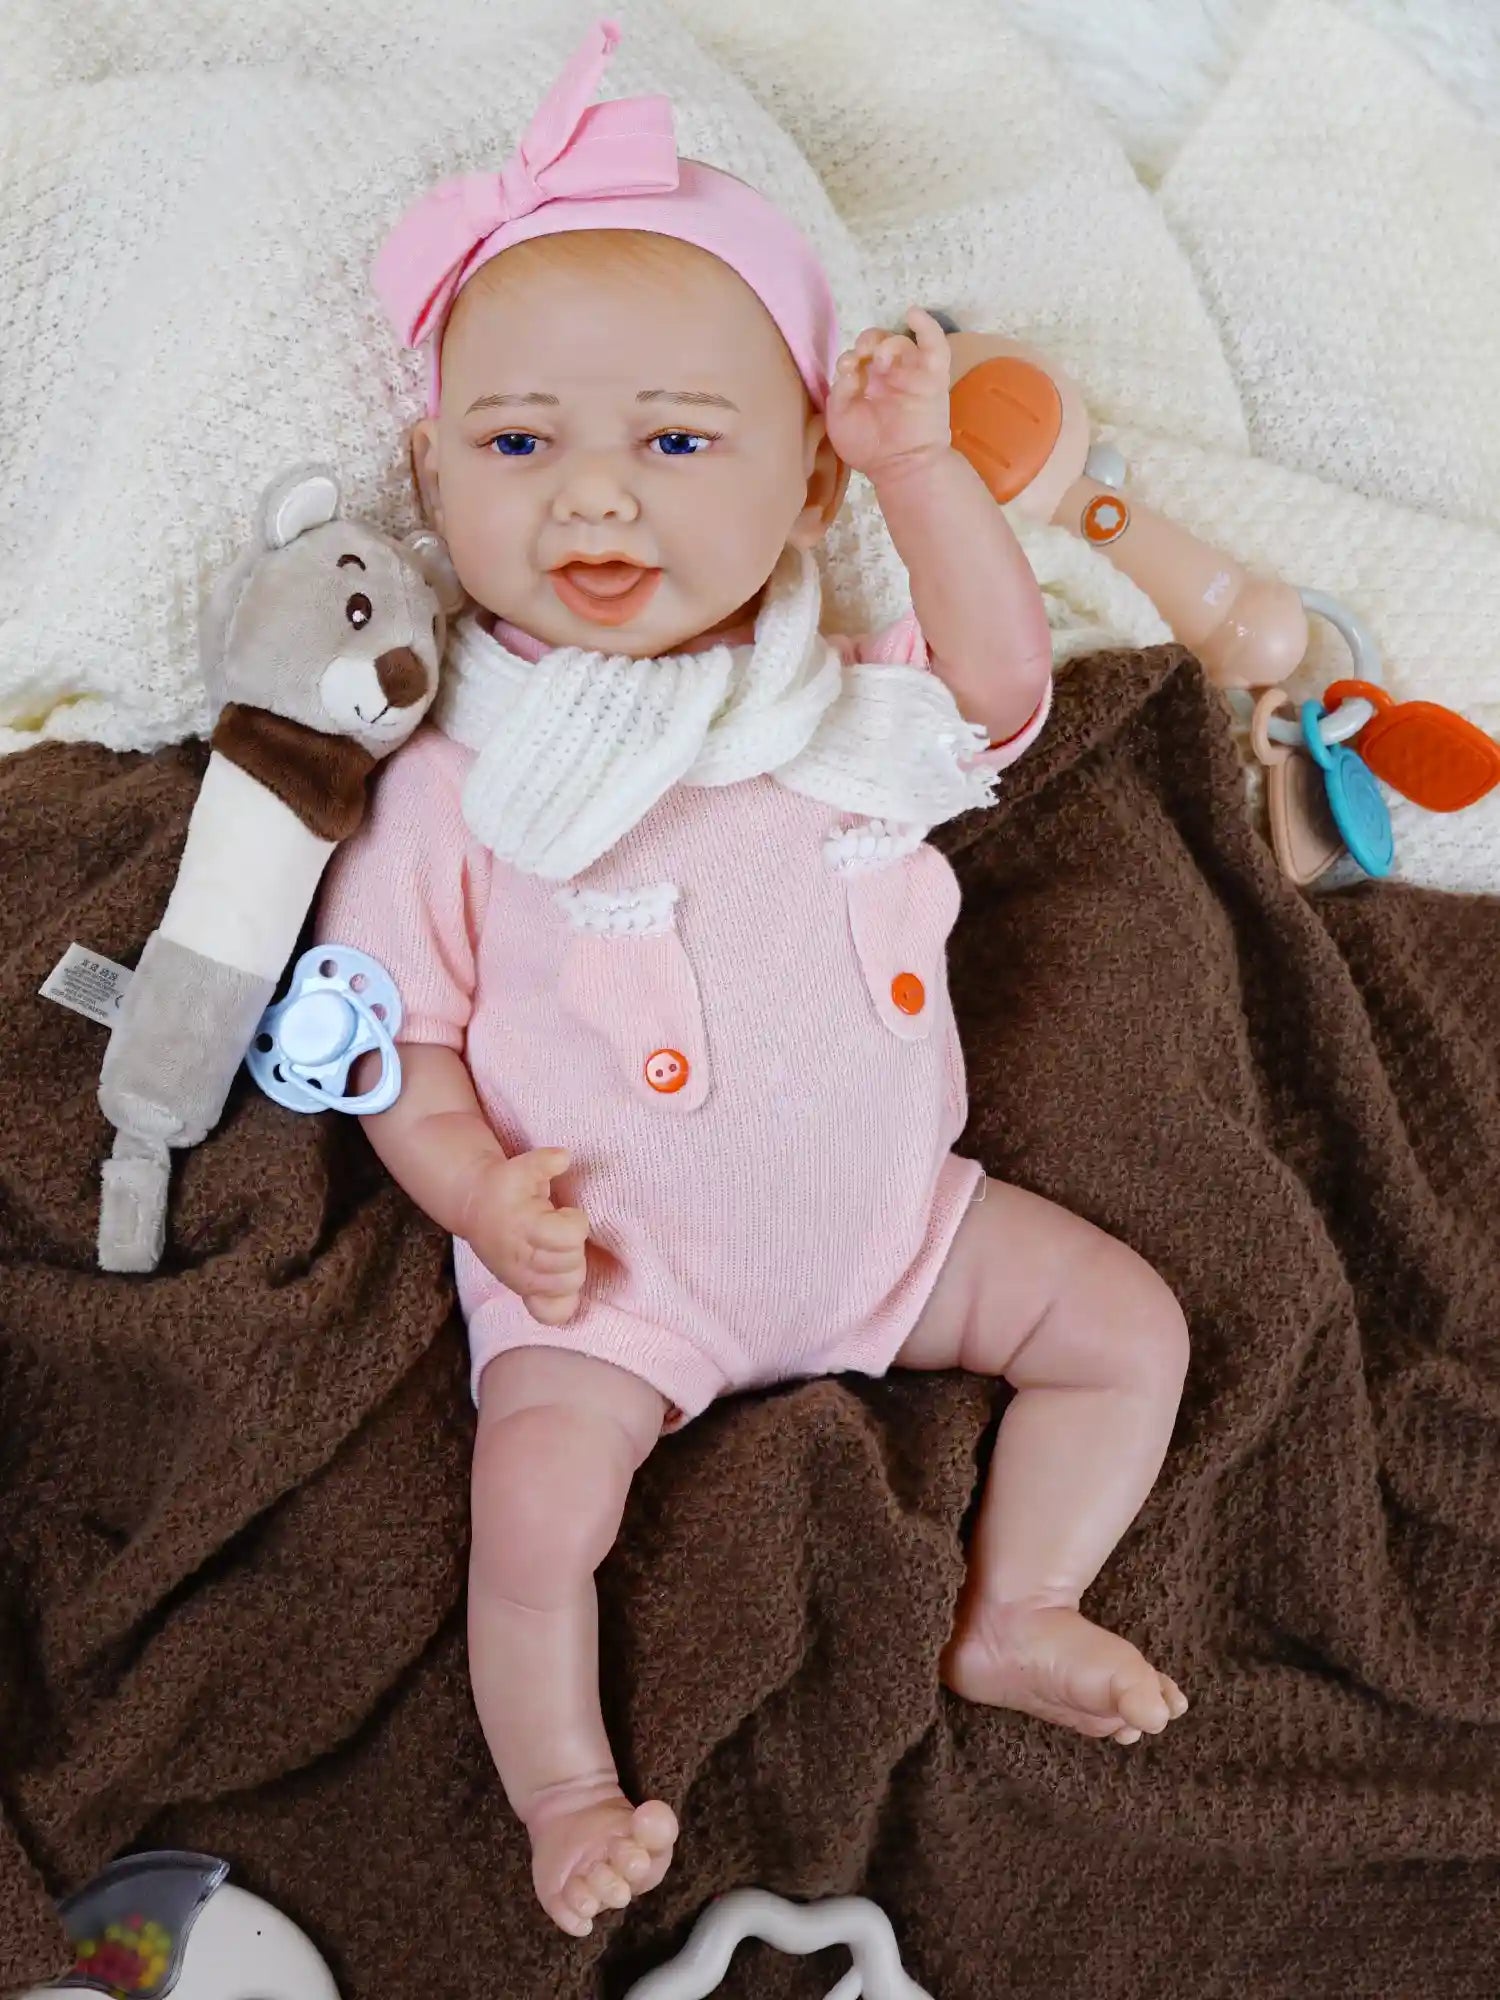 Reborn baby doll with blue eyes and a white bow headband lying on a white blanket, next to a brown blanket, with a plush bear toy and a blue pacifier nearby.